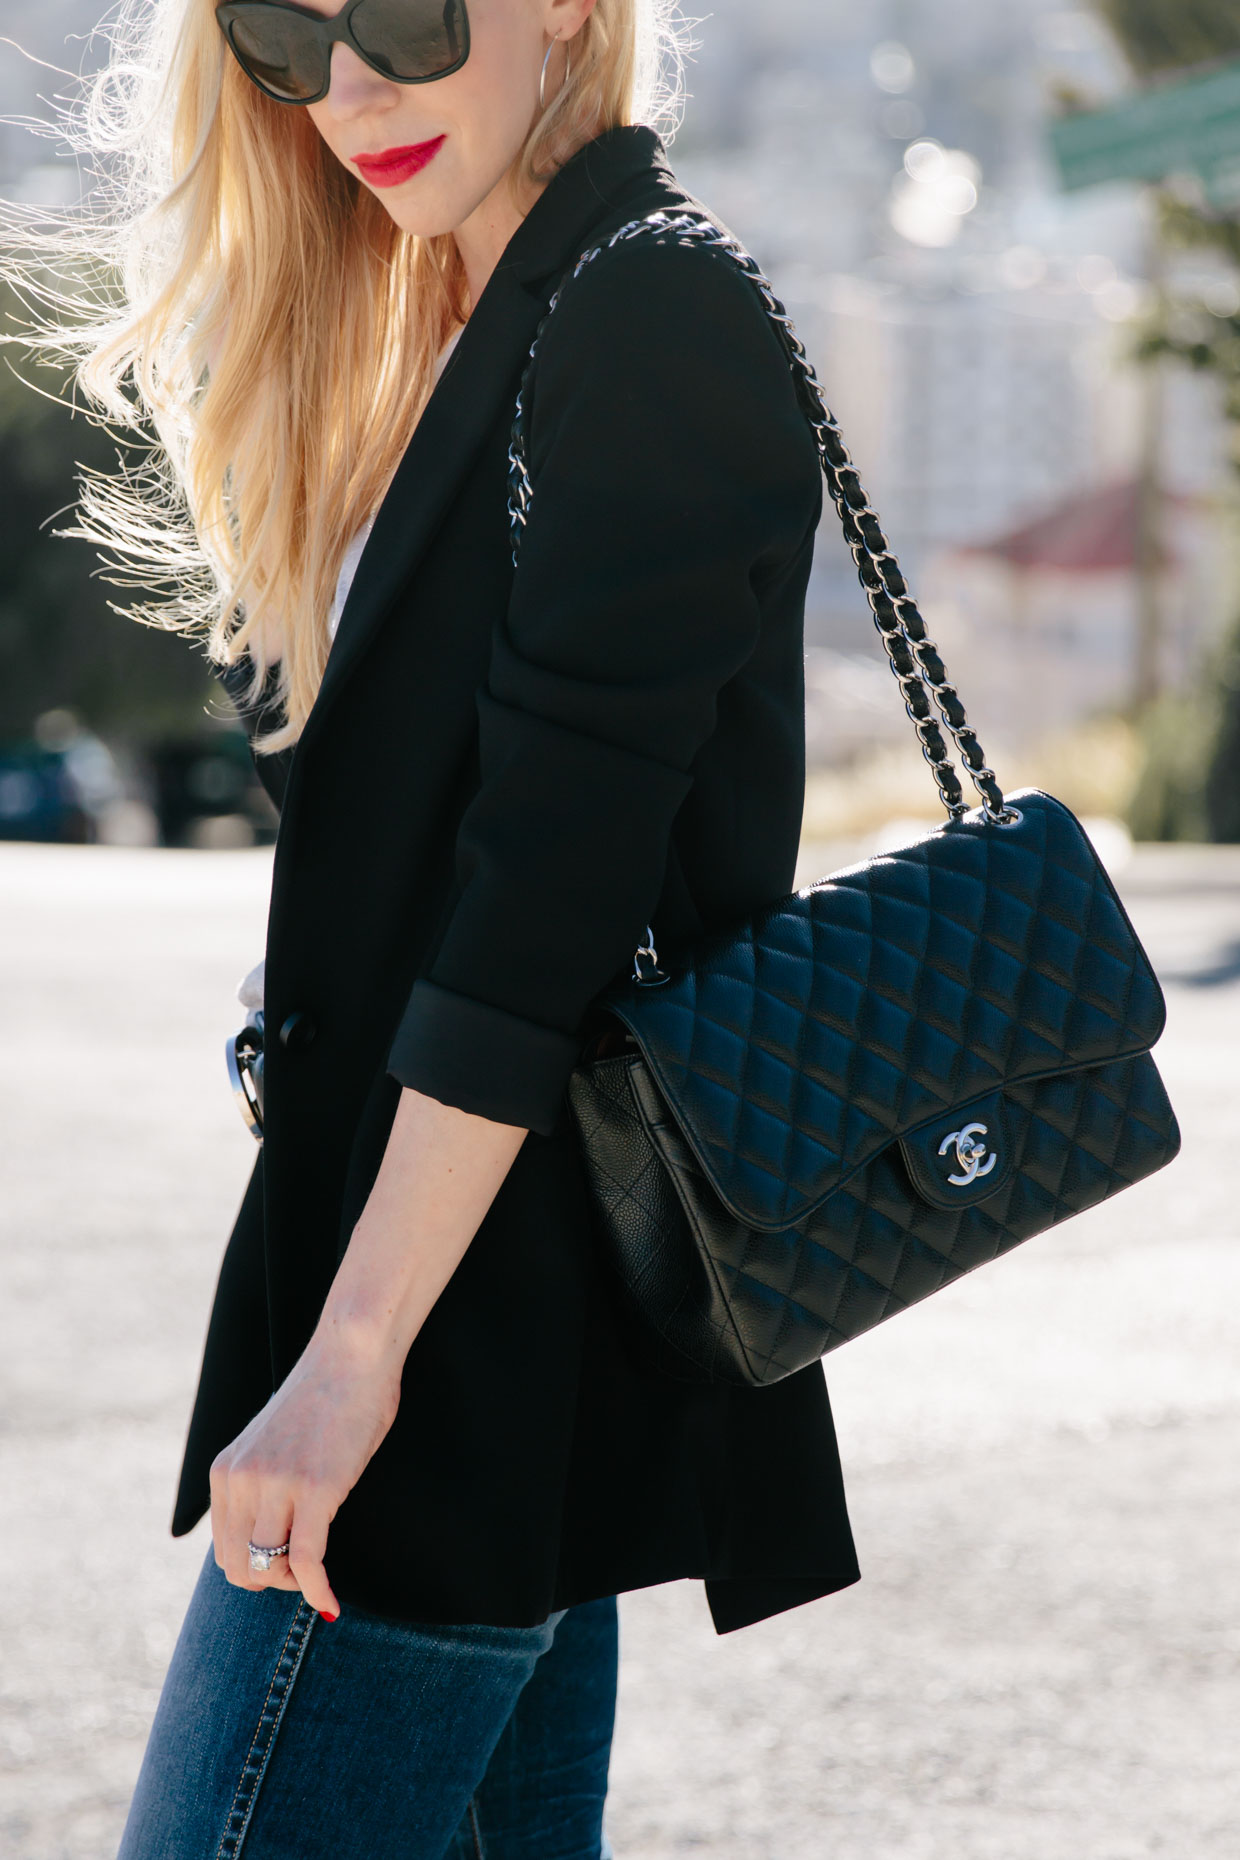 black blazer outfit with red lip and Chanel Jumbo bag, Clinique